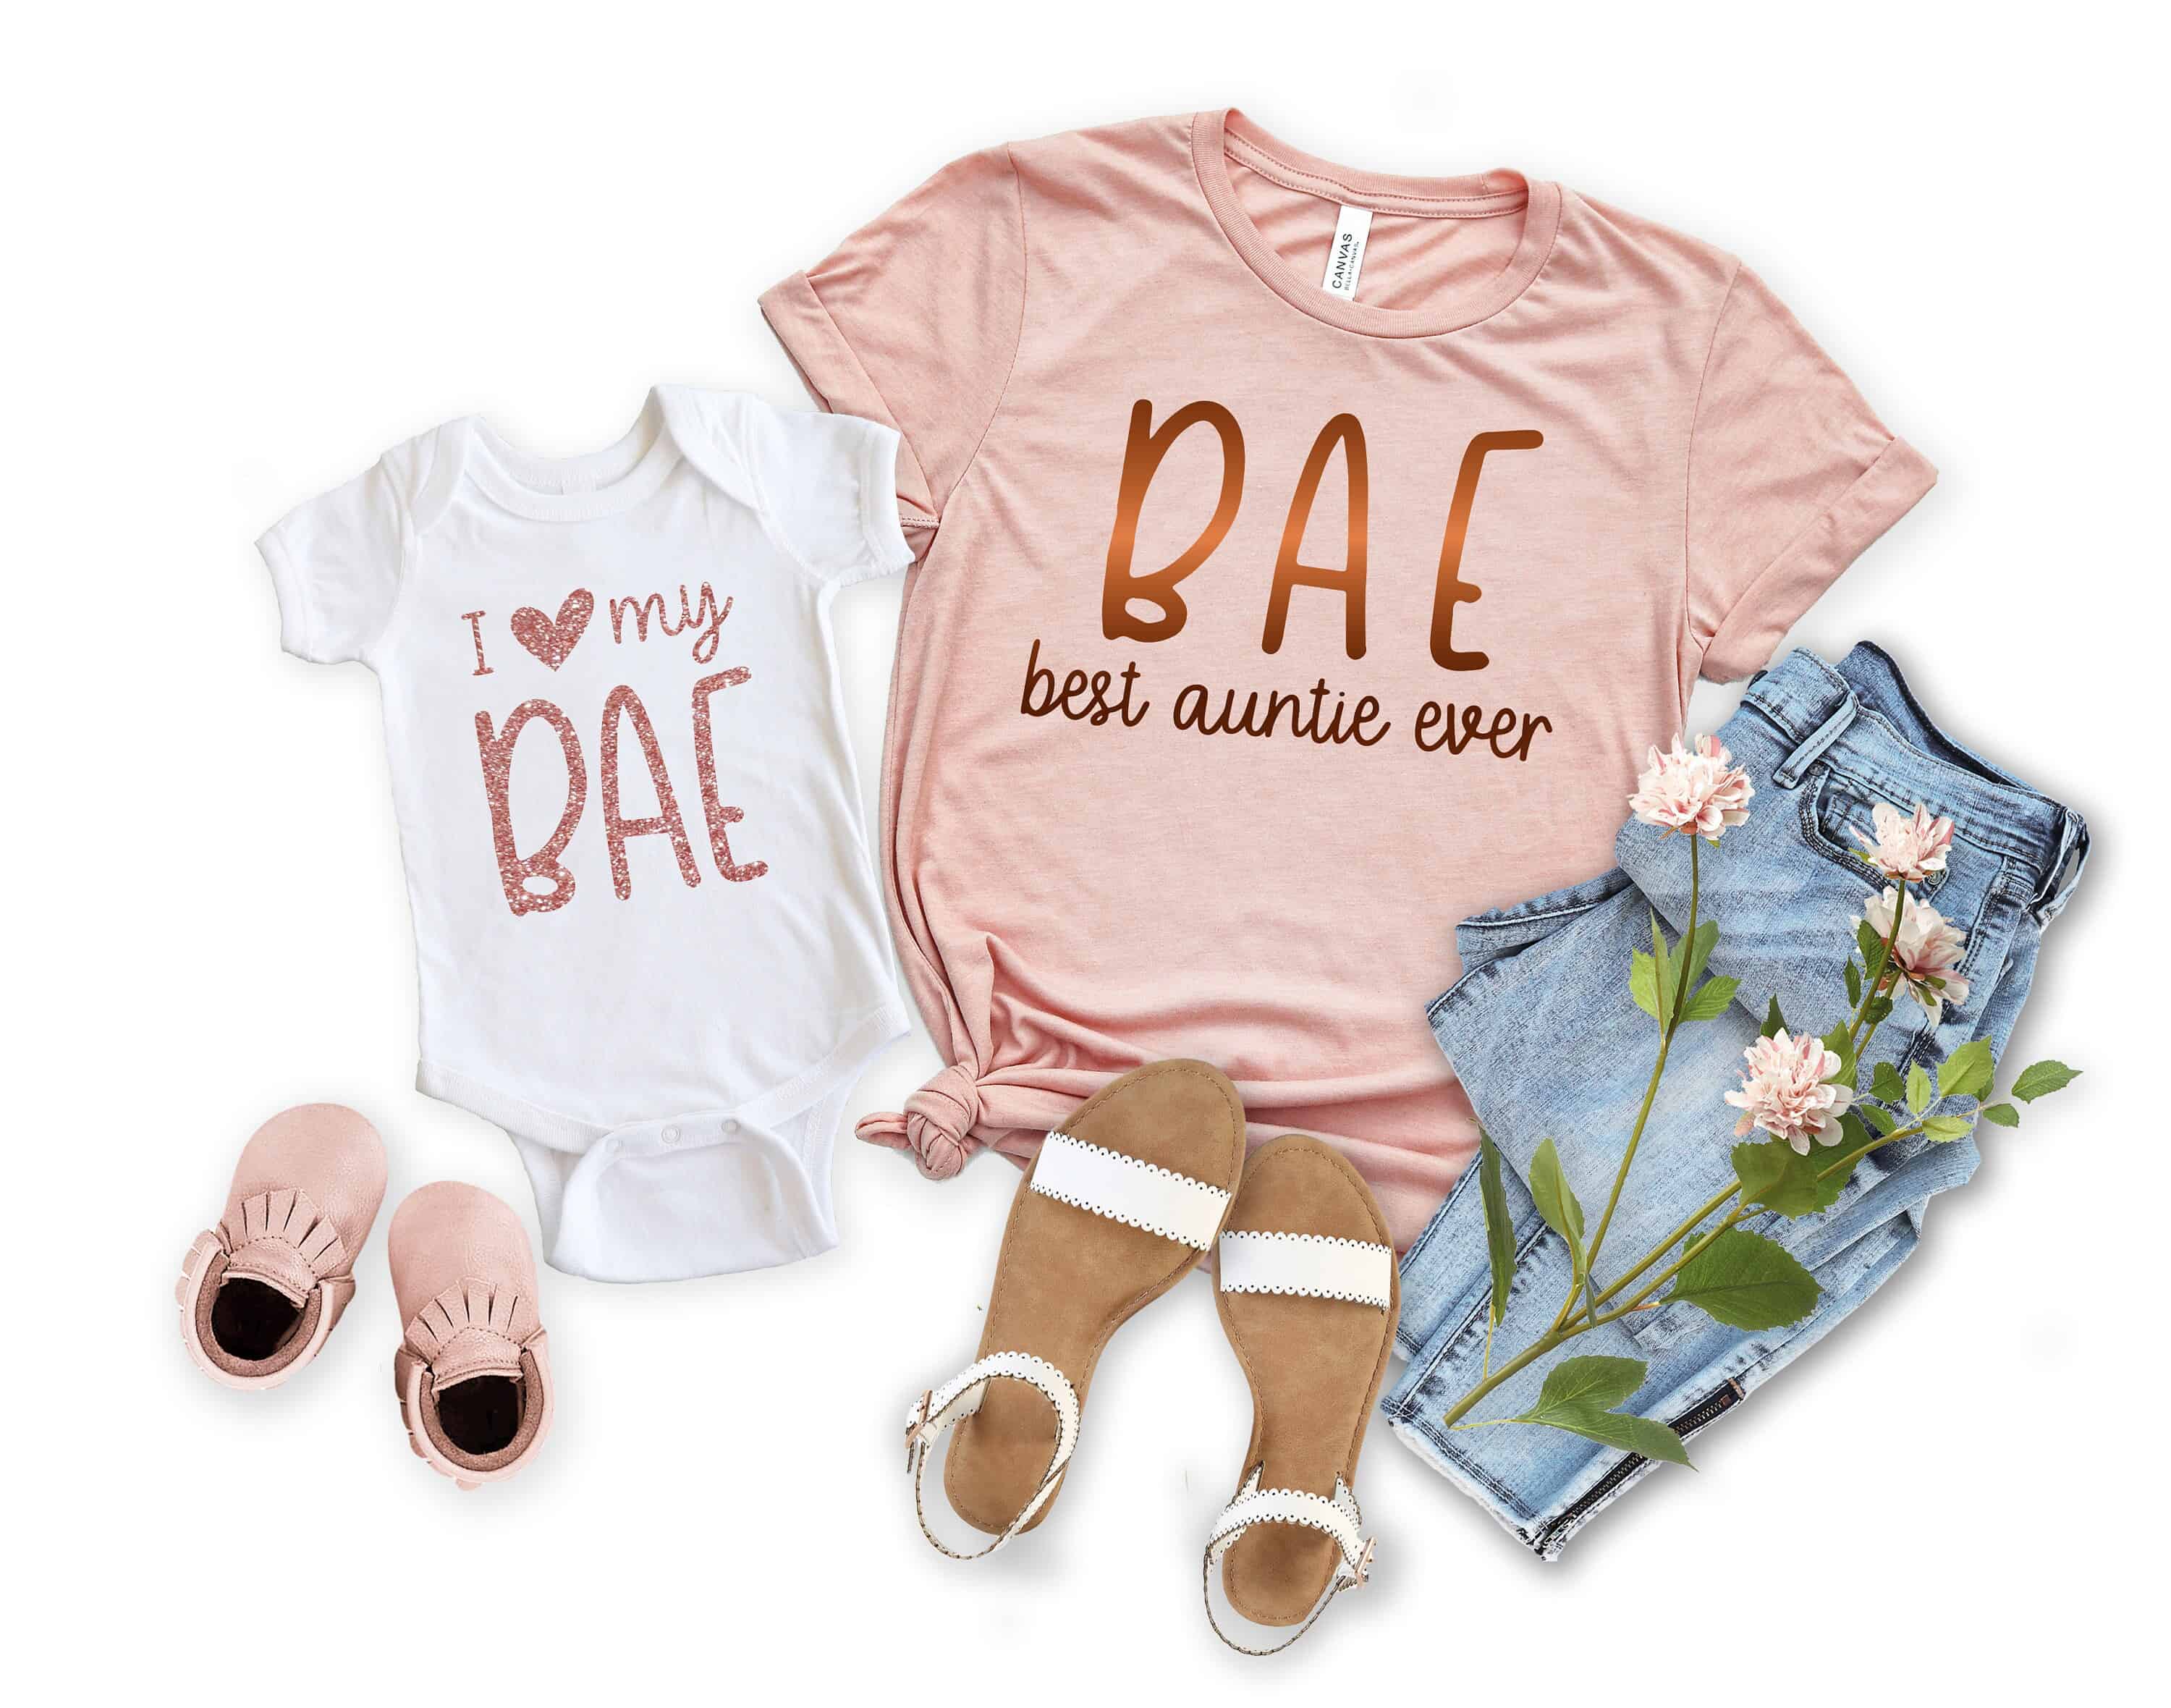 BEST AUNTIE EVER T-SHIRT BAE FAMILY LOVE FUNNY FASHION LOVE TUMBLR LADIES TOP 